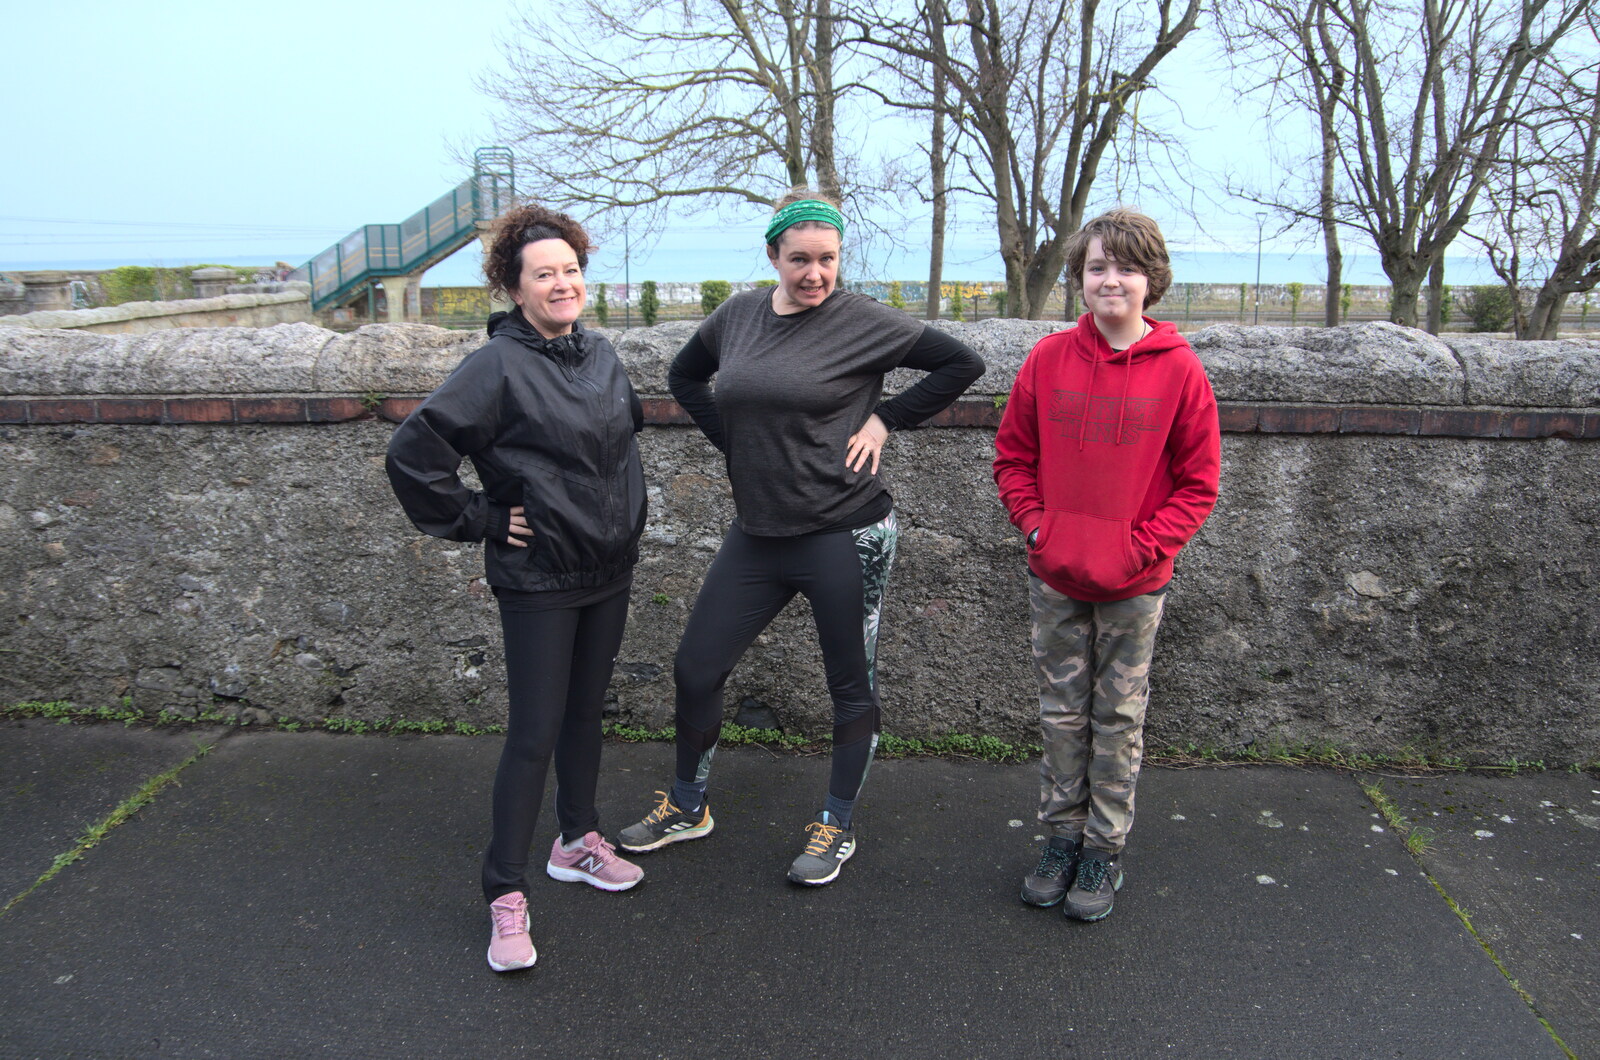 The End of the Breffni, Blackrock, Dublin - 18th February 2023: Evelyn, Isobel and Fred before their run